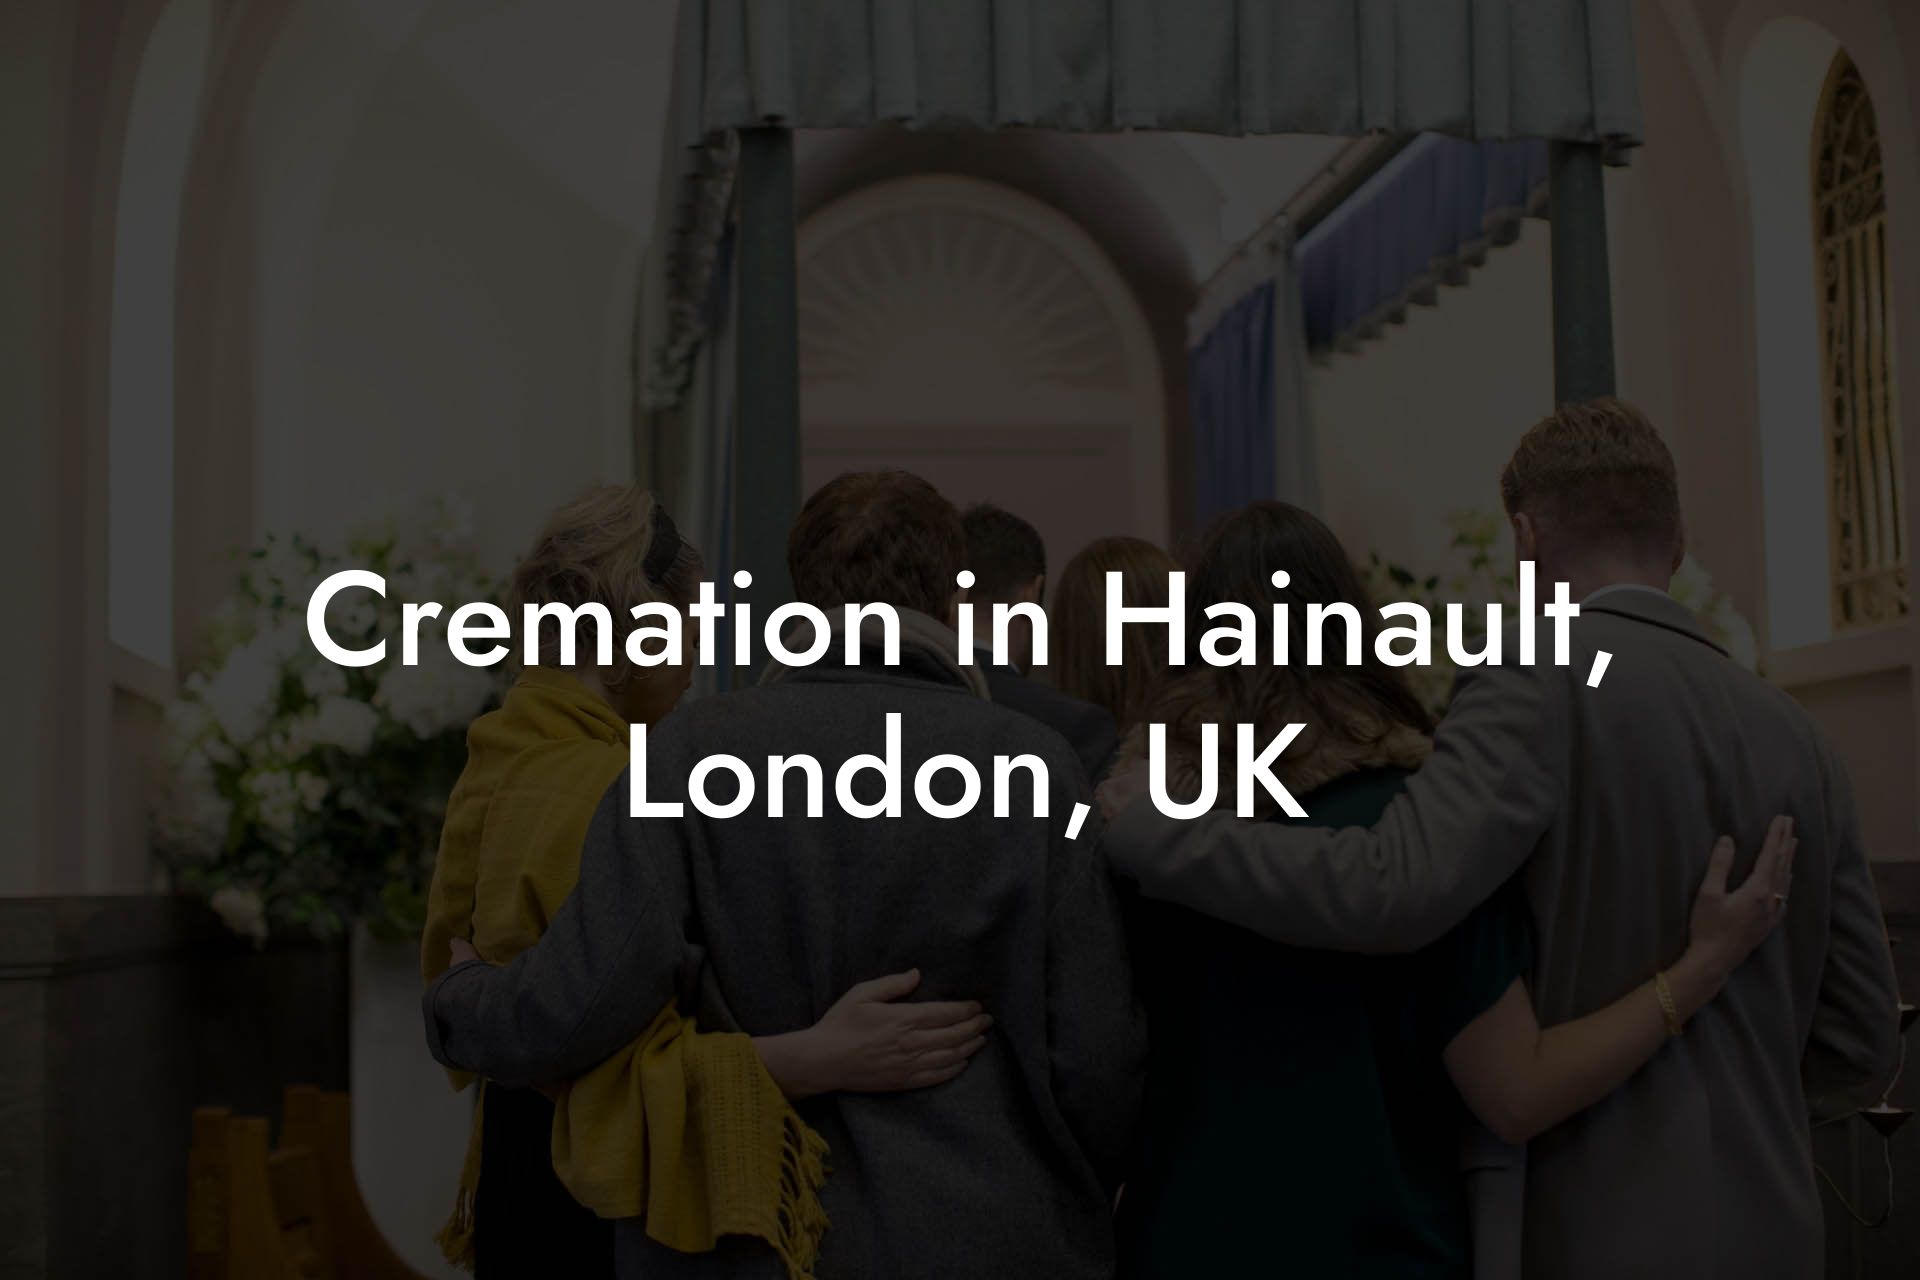 Cremation in Hainault, London, UK